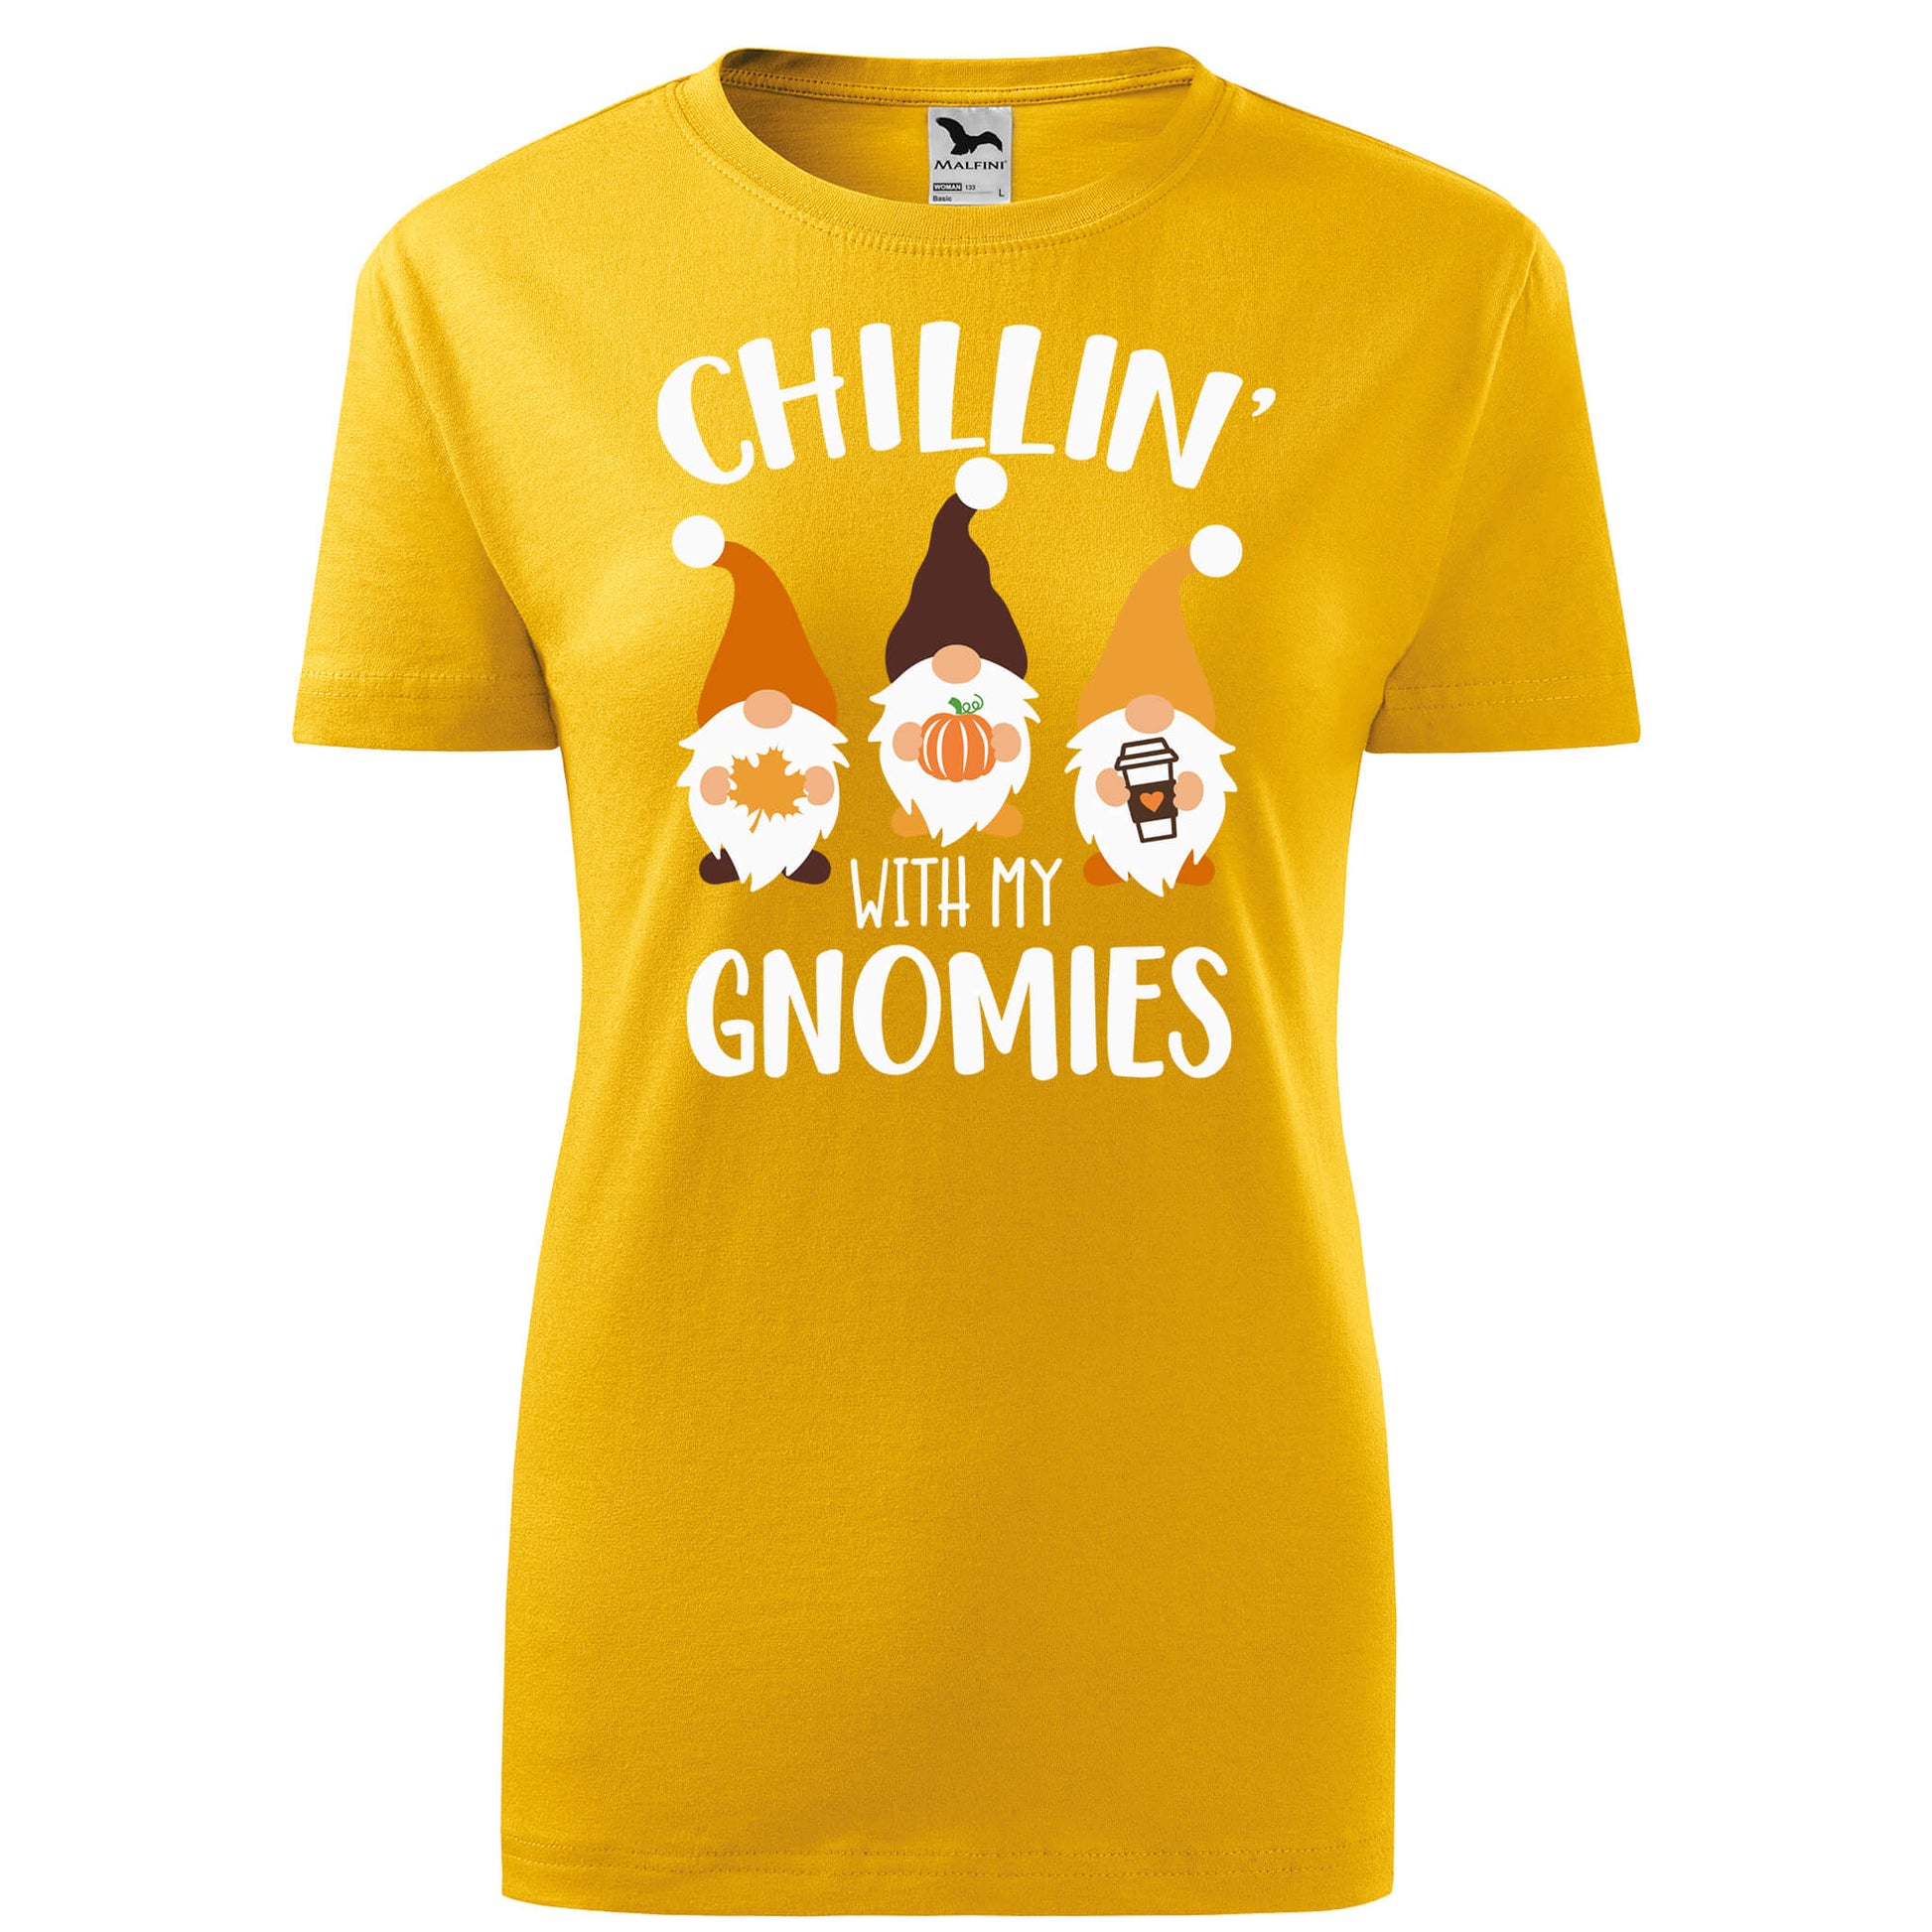 Chilling with my gnomies t-shirt - rvdesignprint